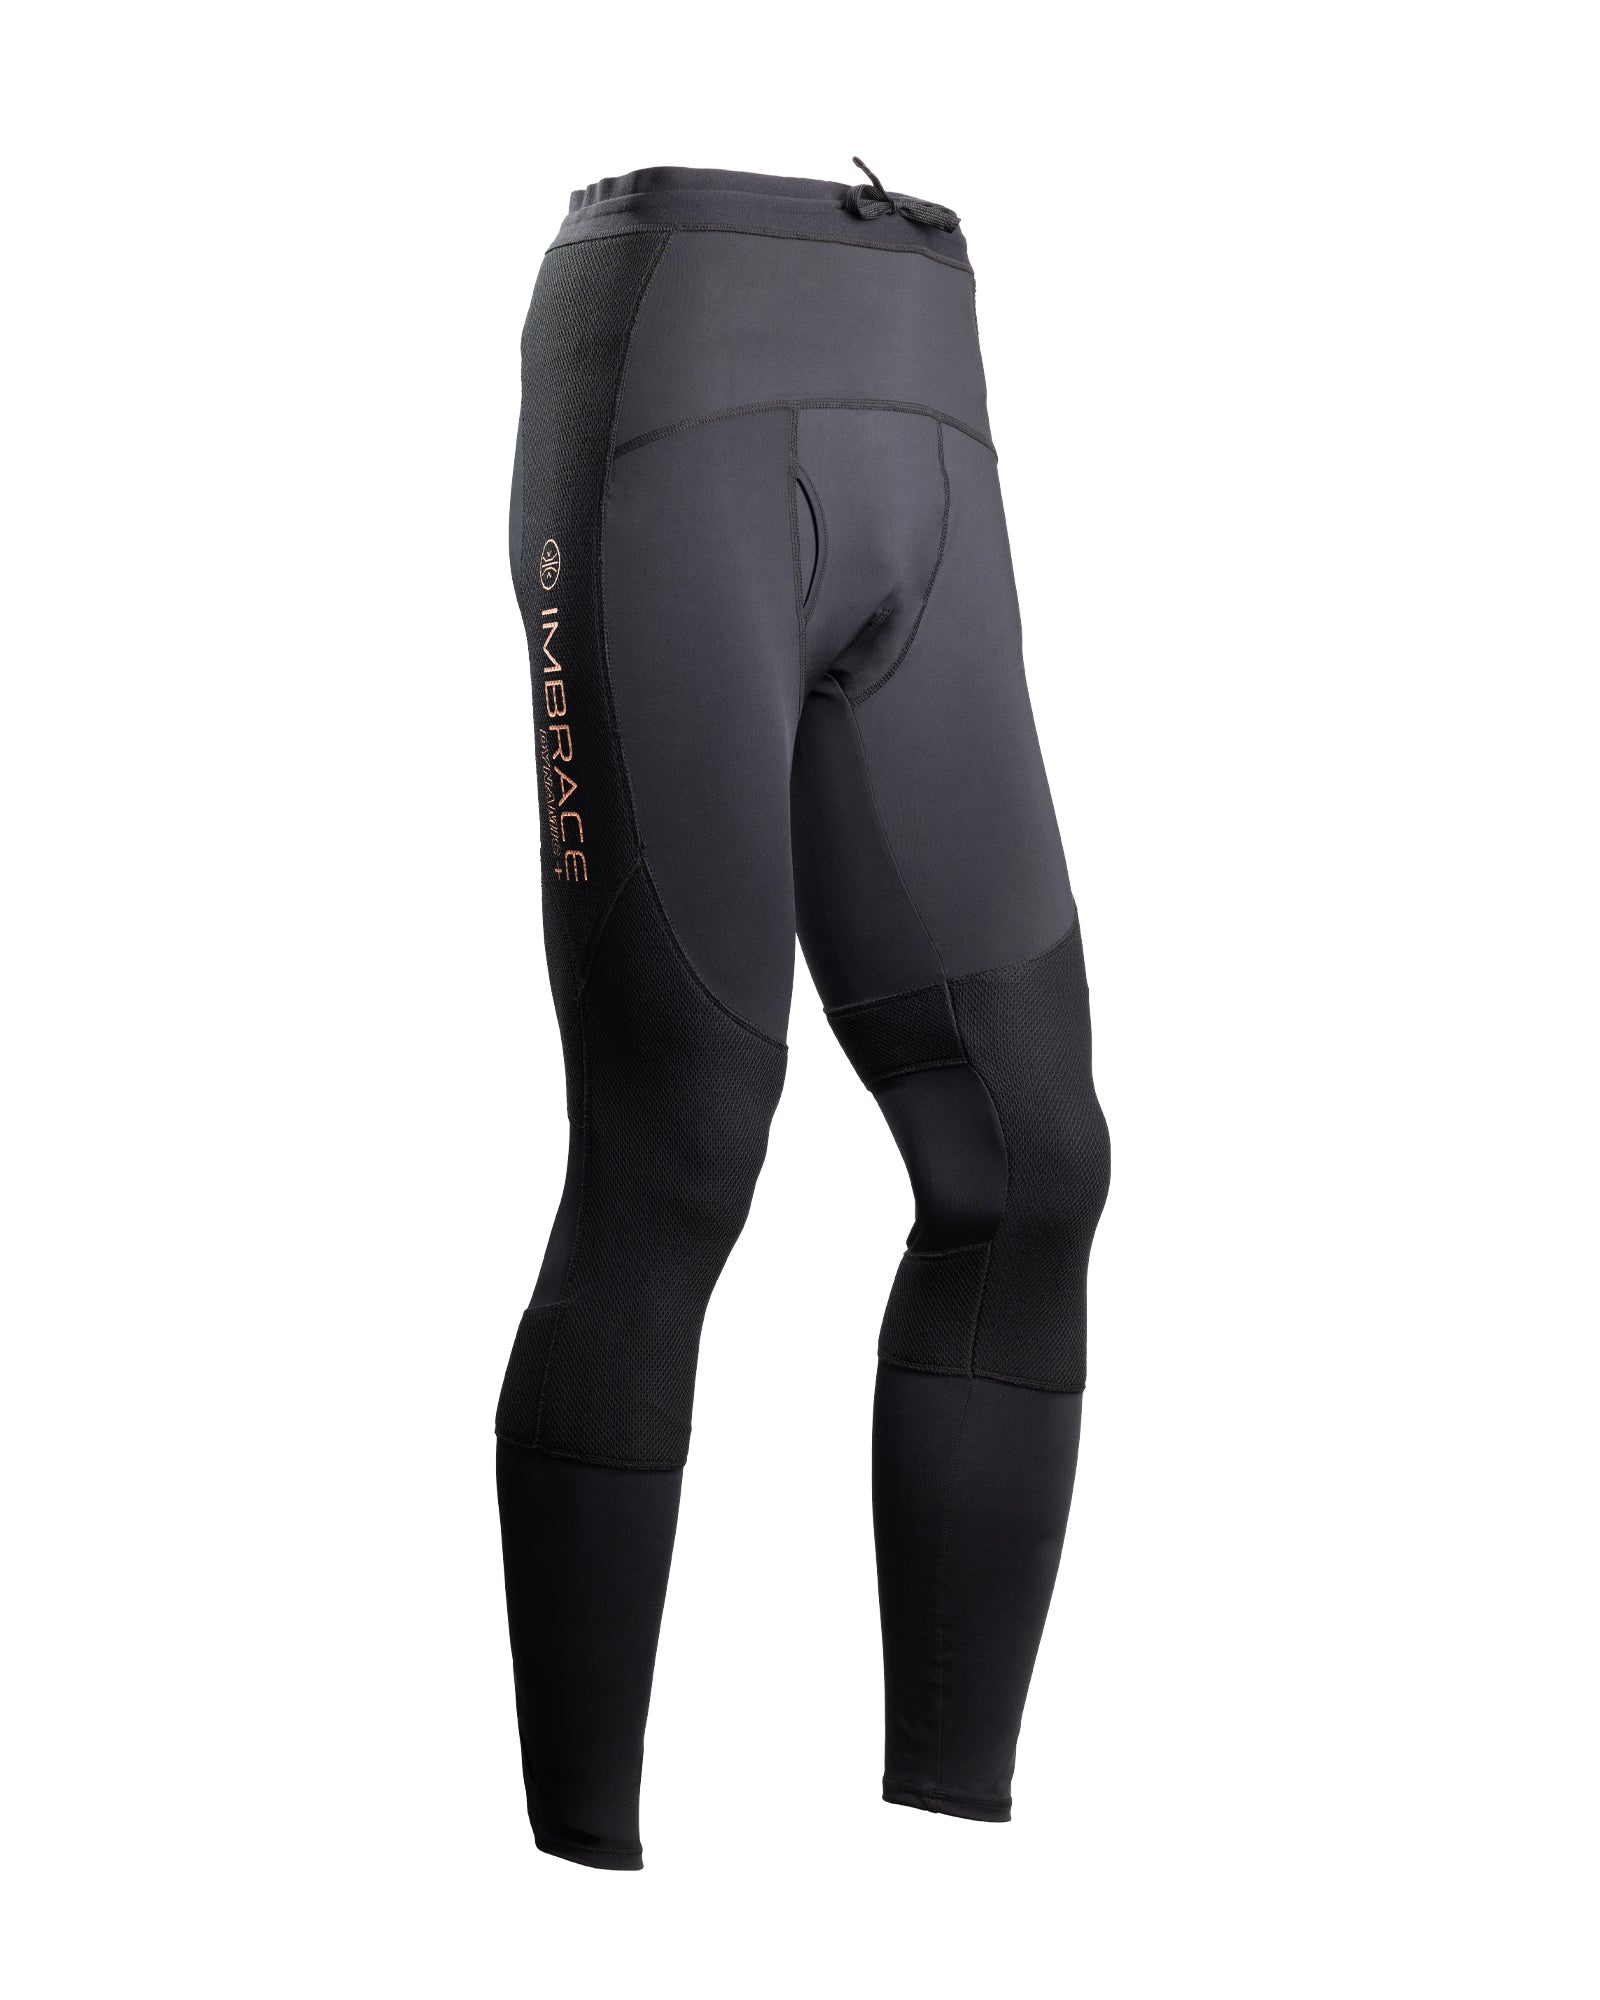 Stylish and Athletic Men's Compression Tights